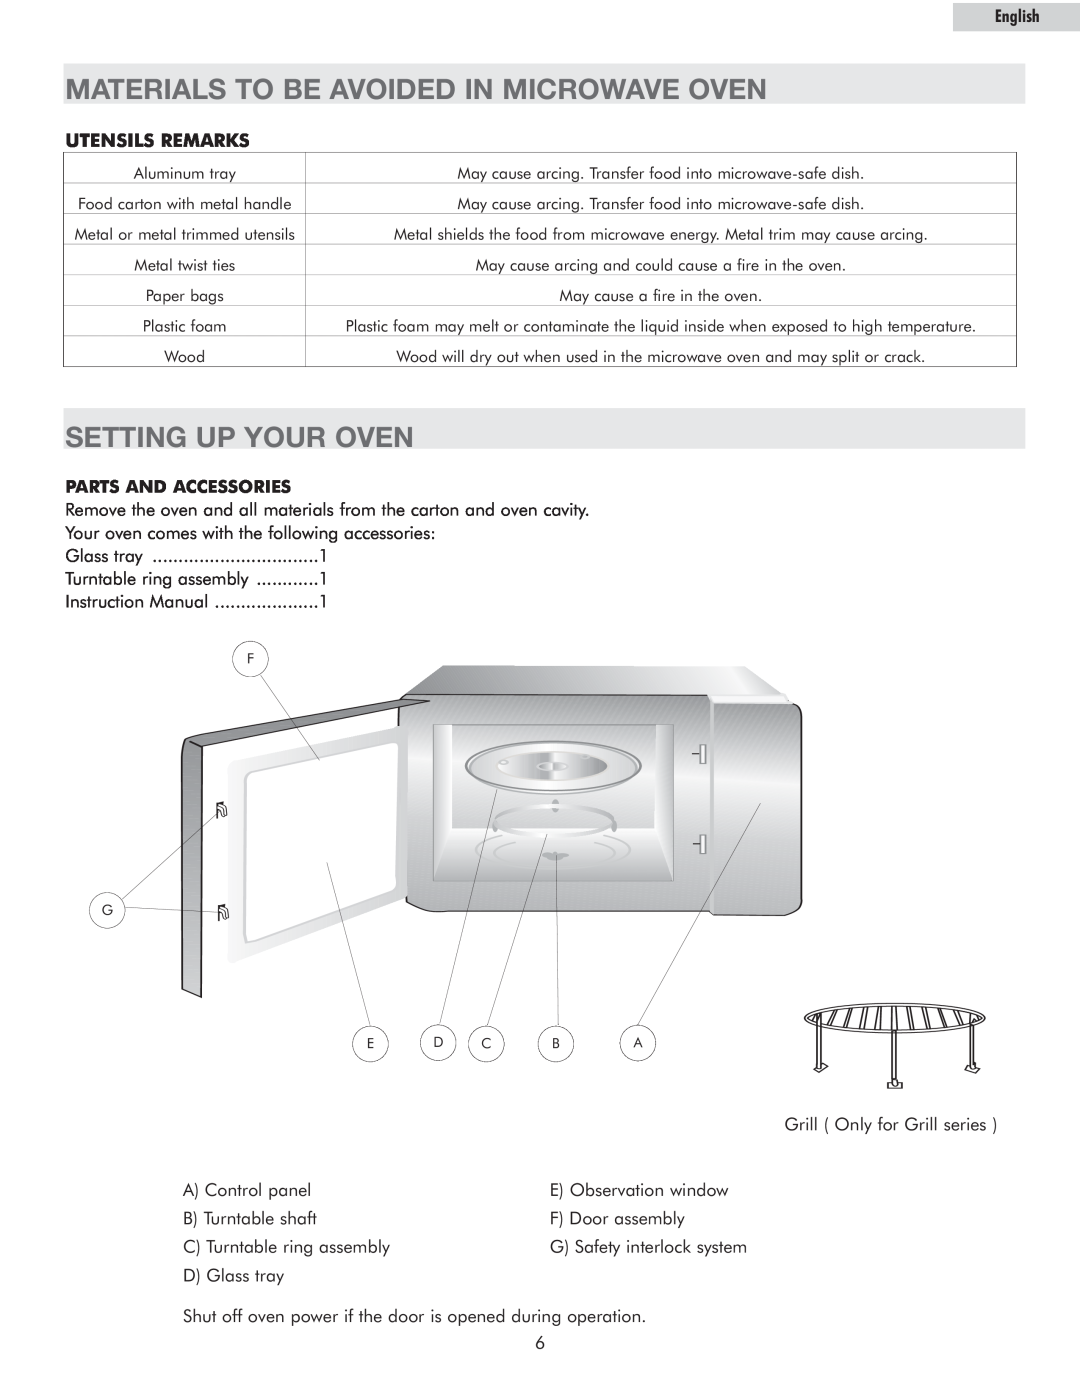 Haier MWM13110GSS owner manual Materials To Be Avoided In Microwave Oven, Setting Up Your Oven, Utensils Remarks, English 